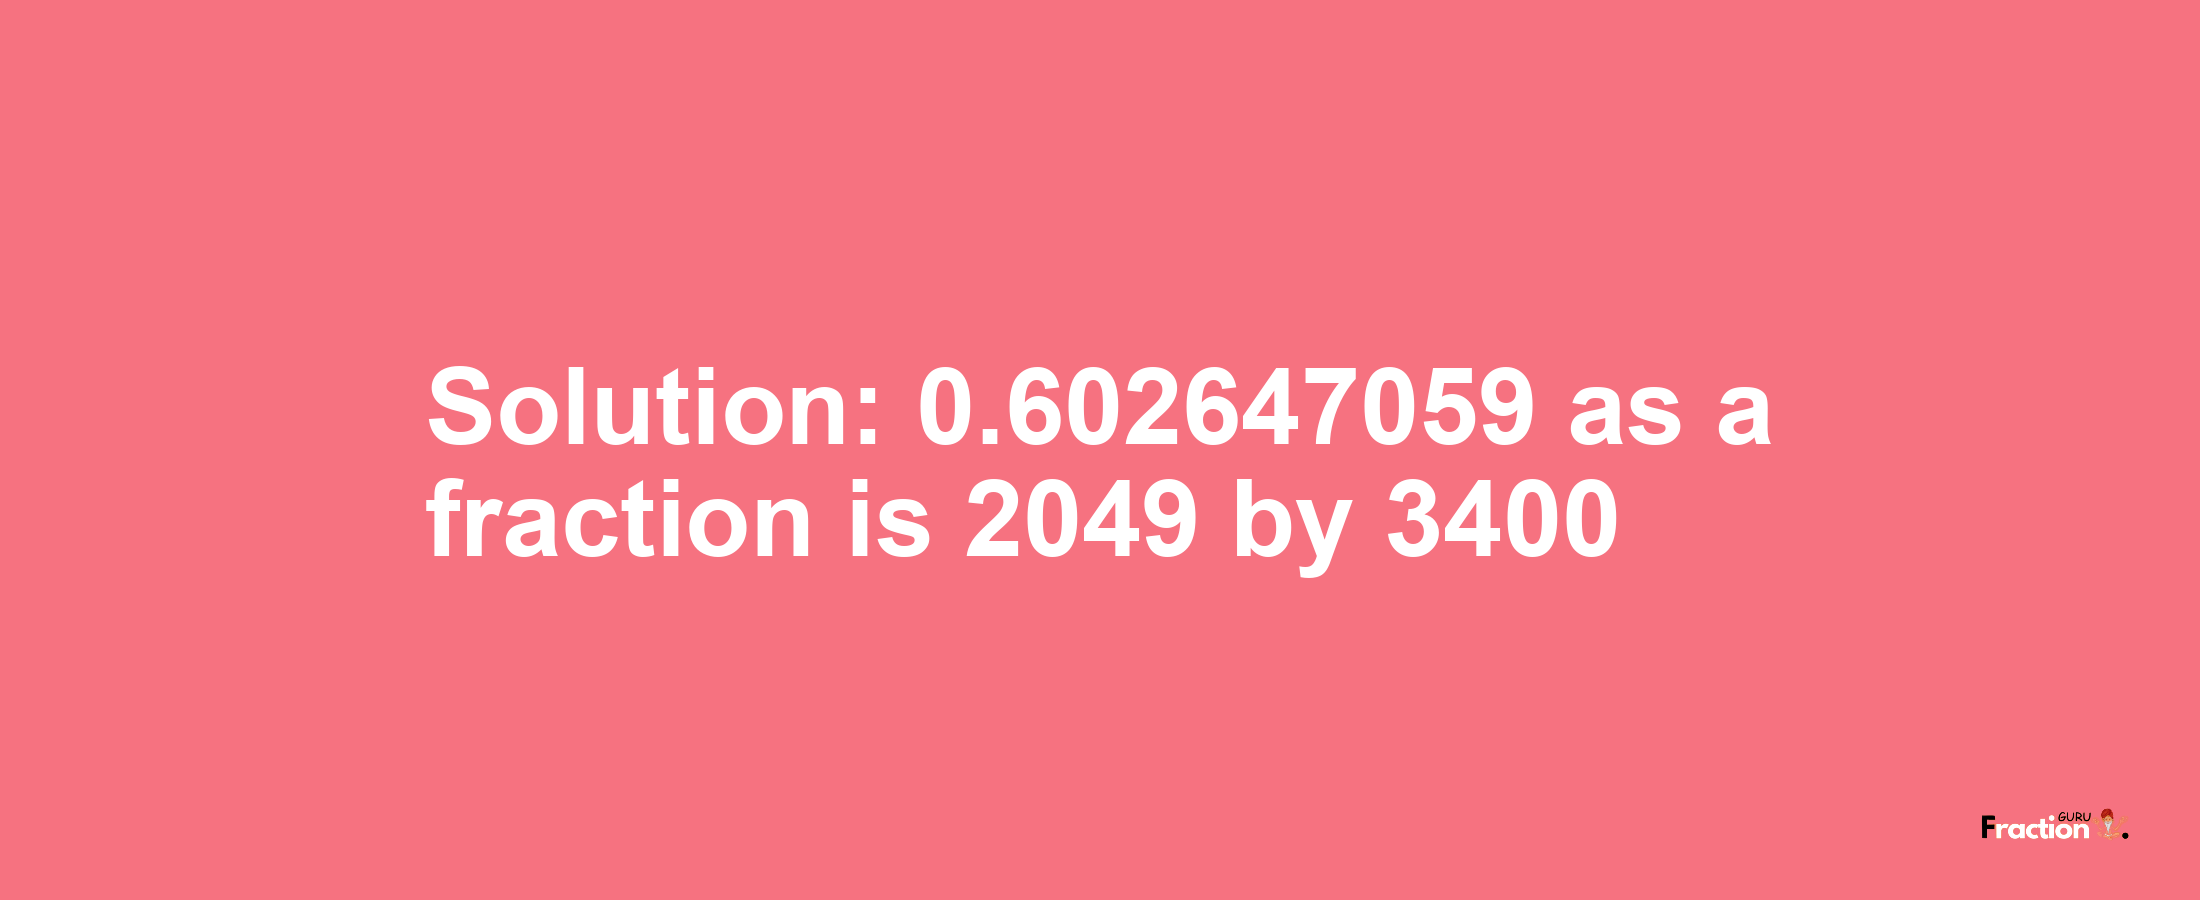 Solution:0.602647059 as a fraction is 2049/3400